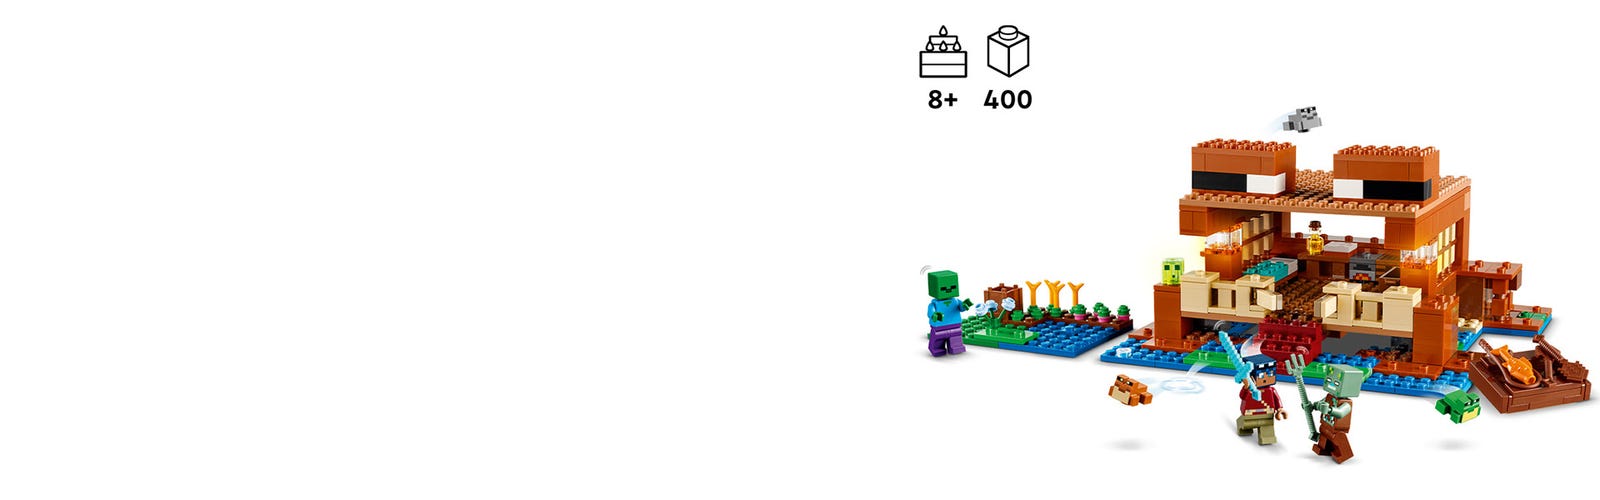 Lego Minecraft 21256 The Frog House